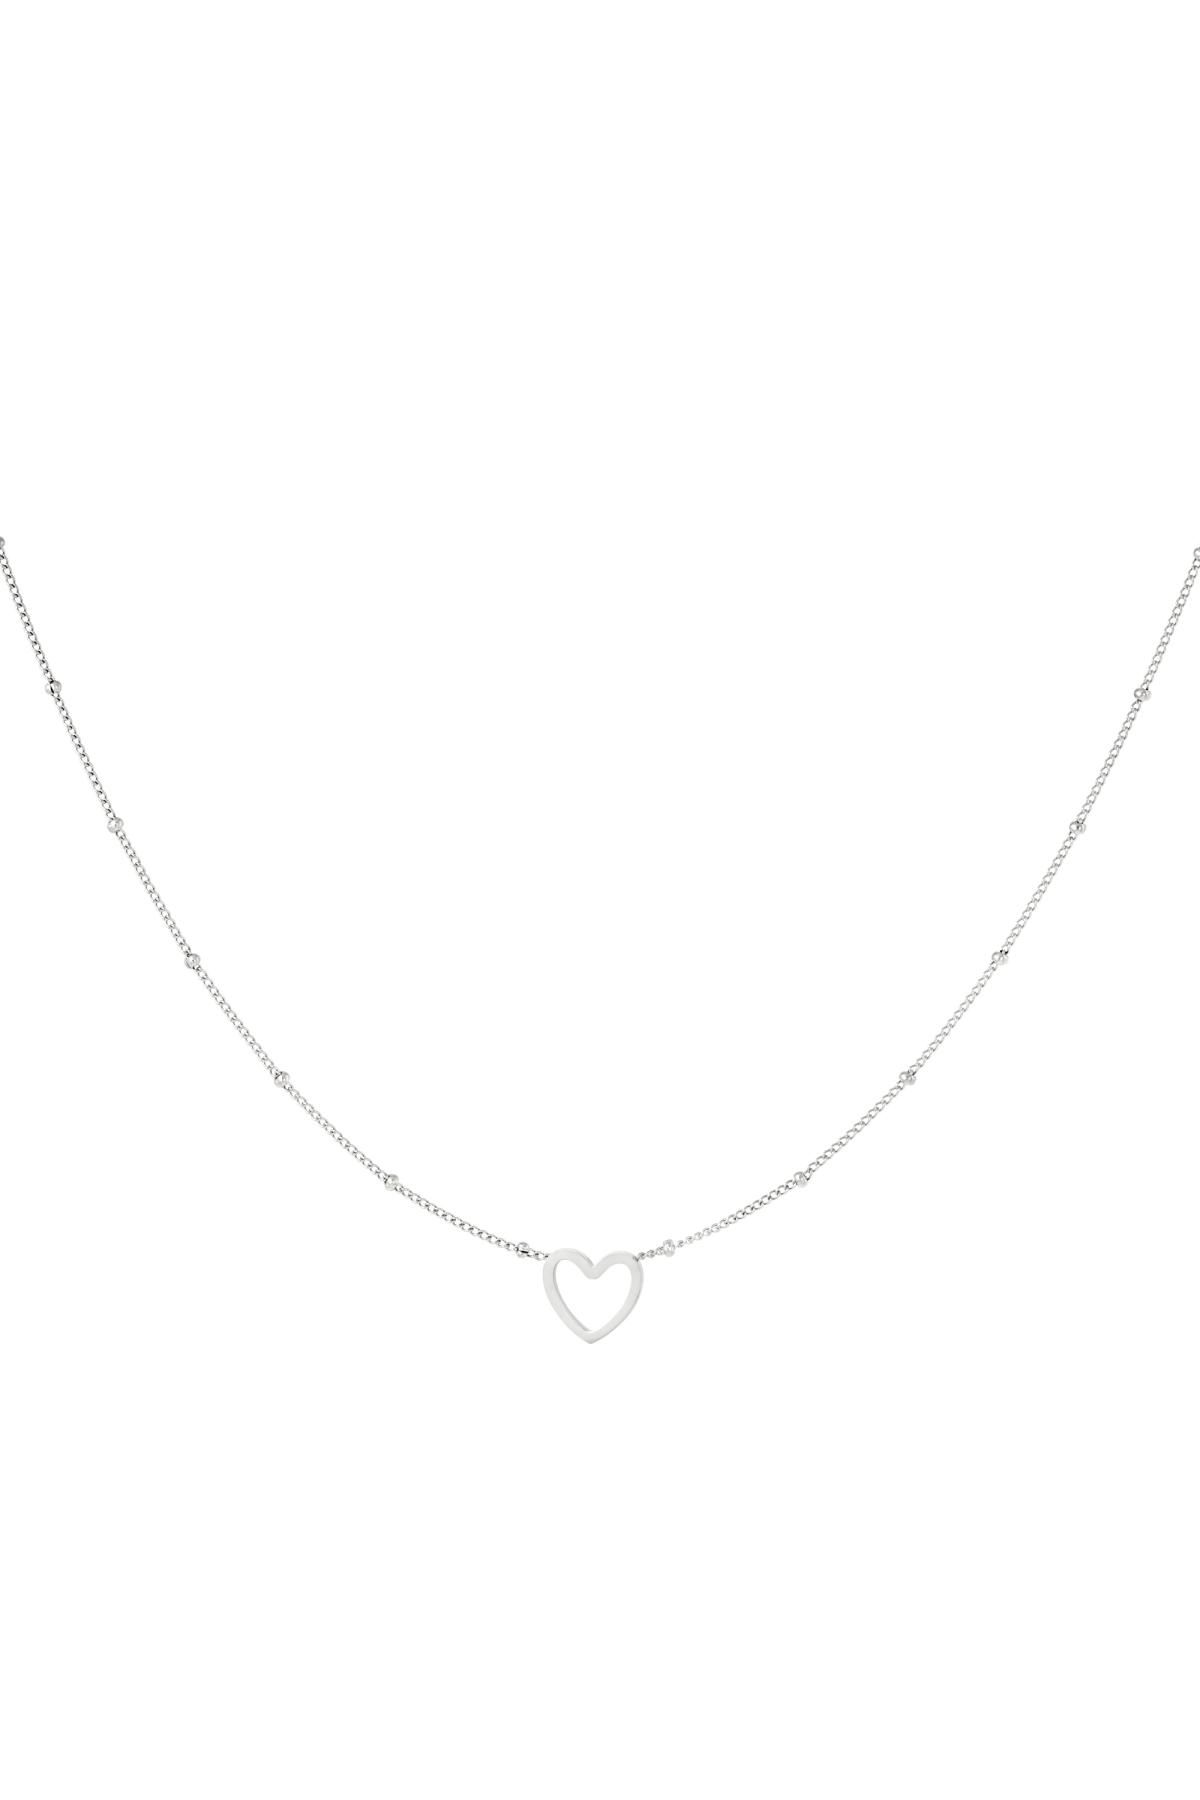 Minimalistic necklace open heart Silver Stainless Steel